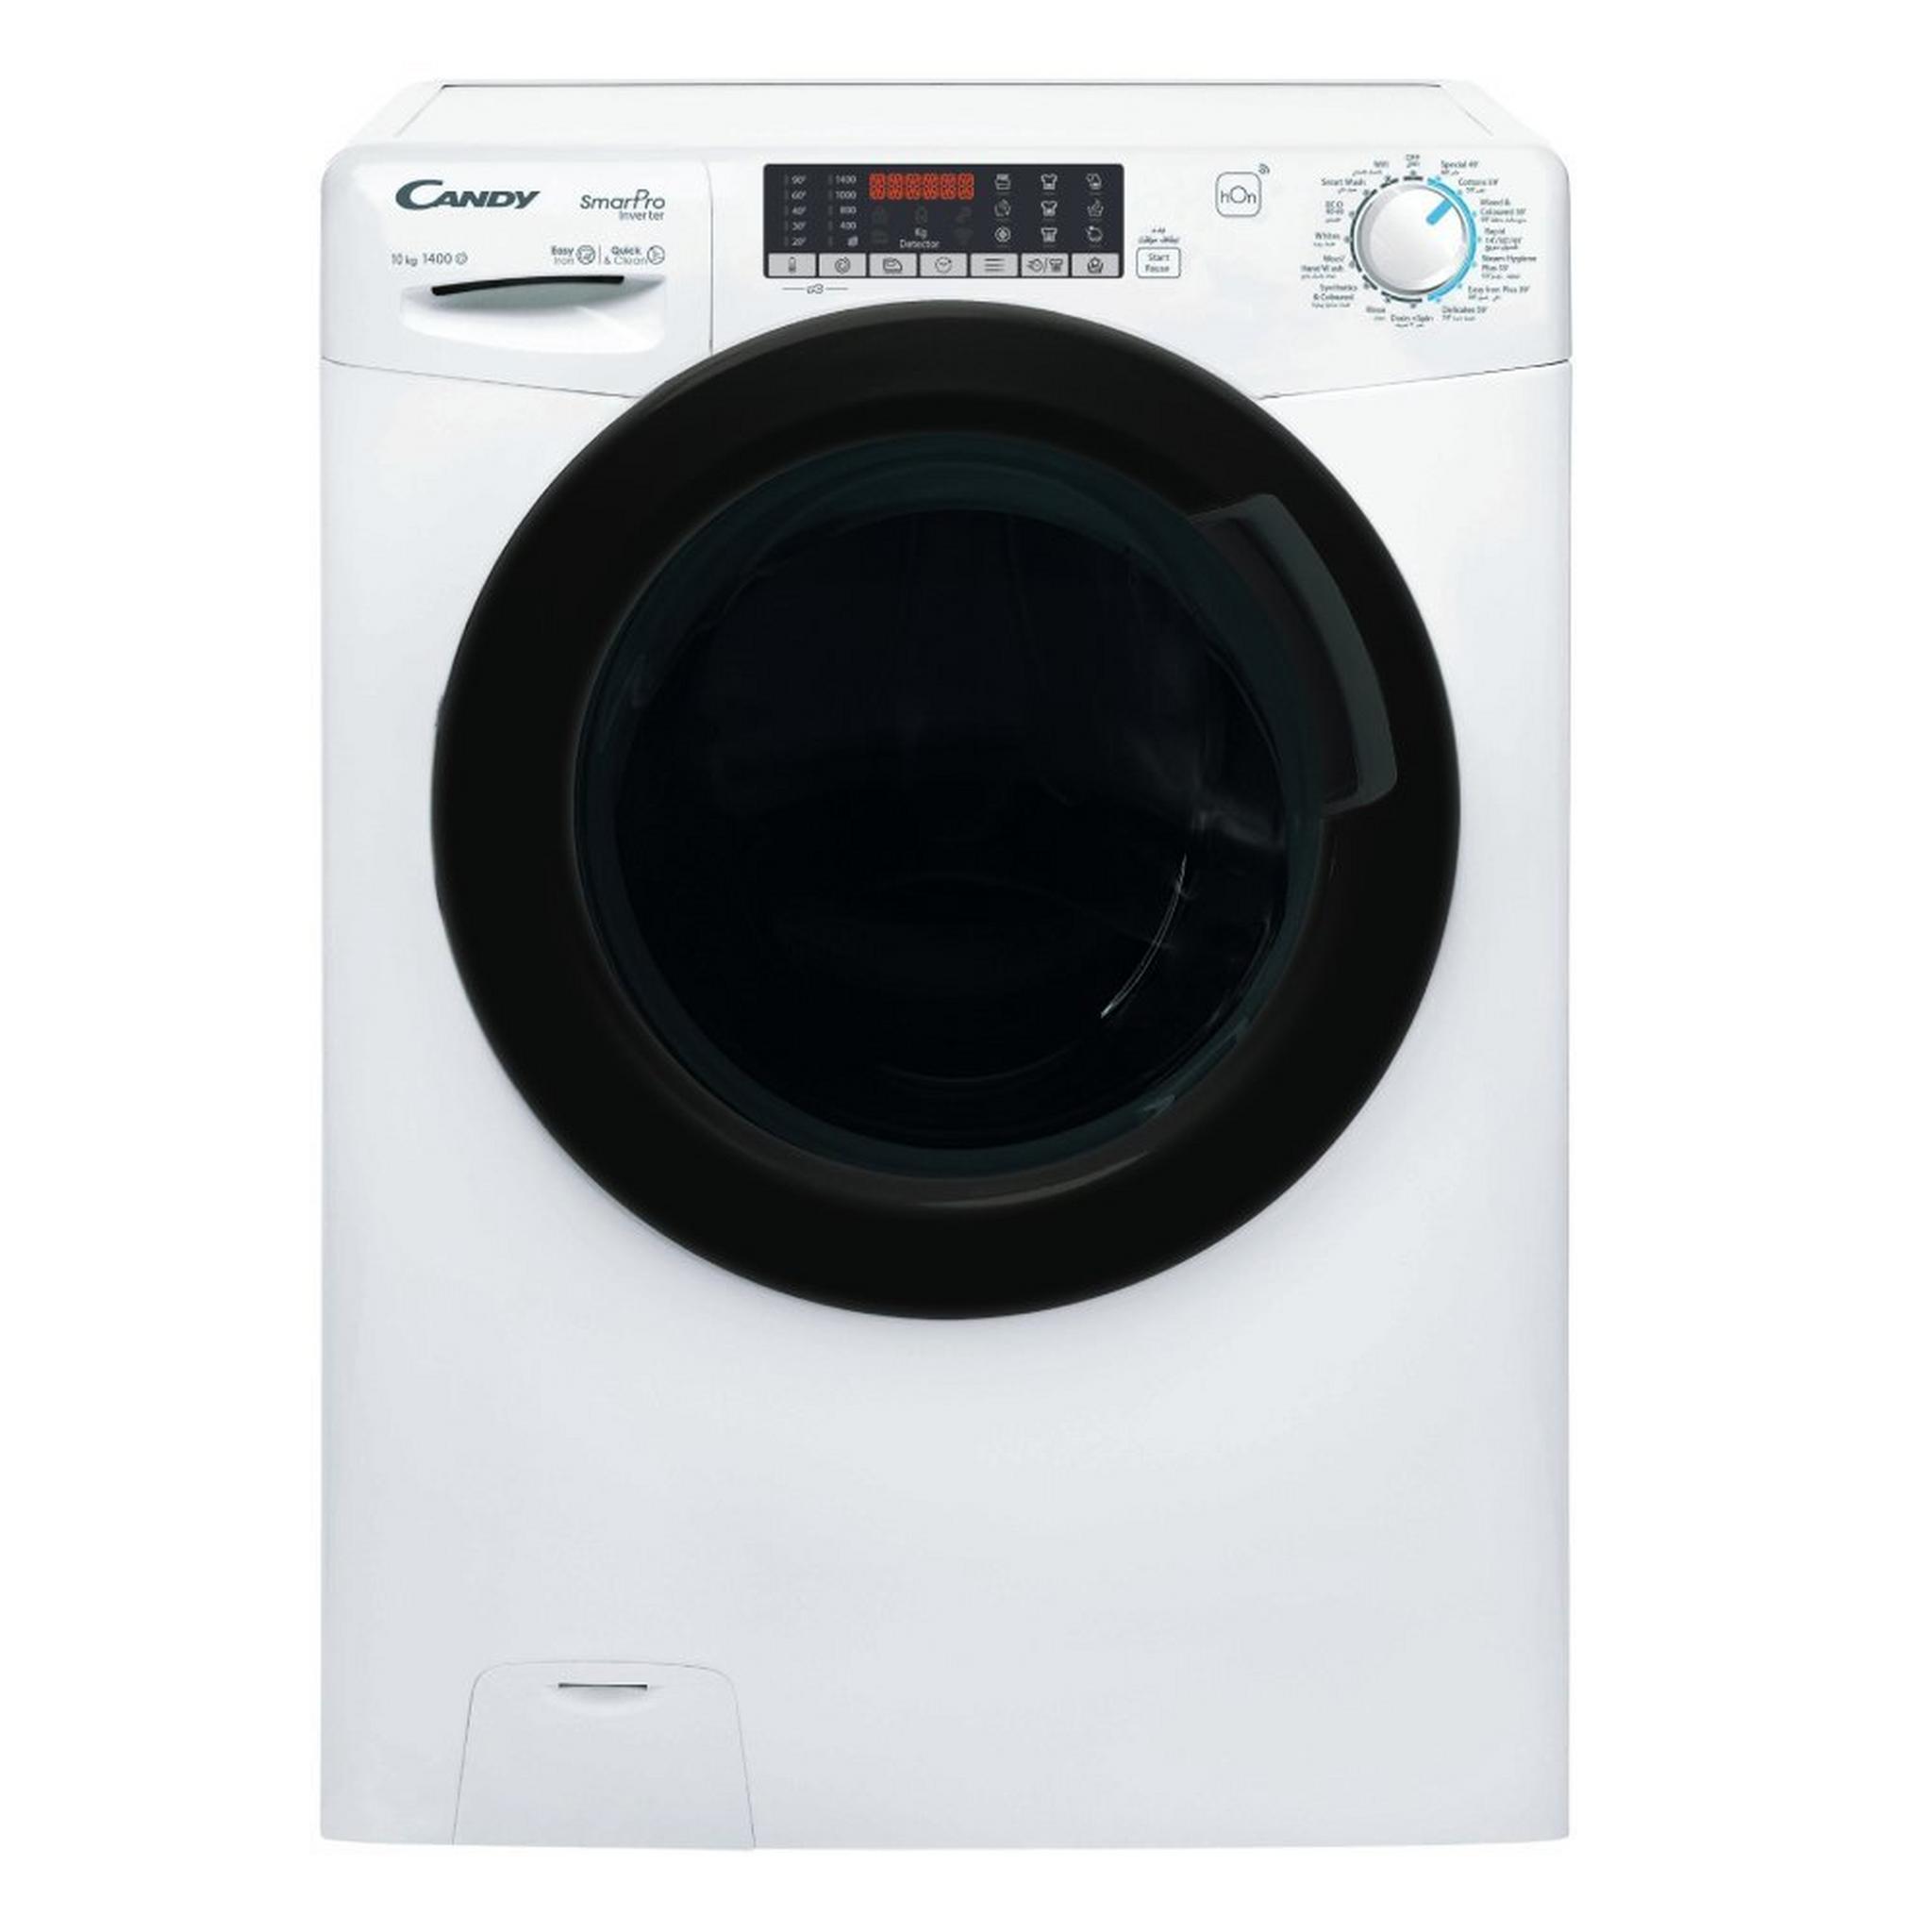 Candy SmartPro Front Load Washer 10Kg CSO4106TWMB-19 - White